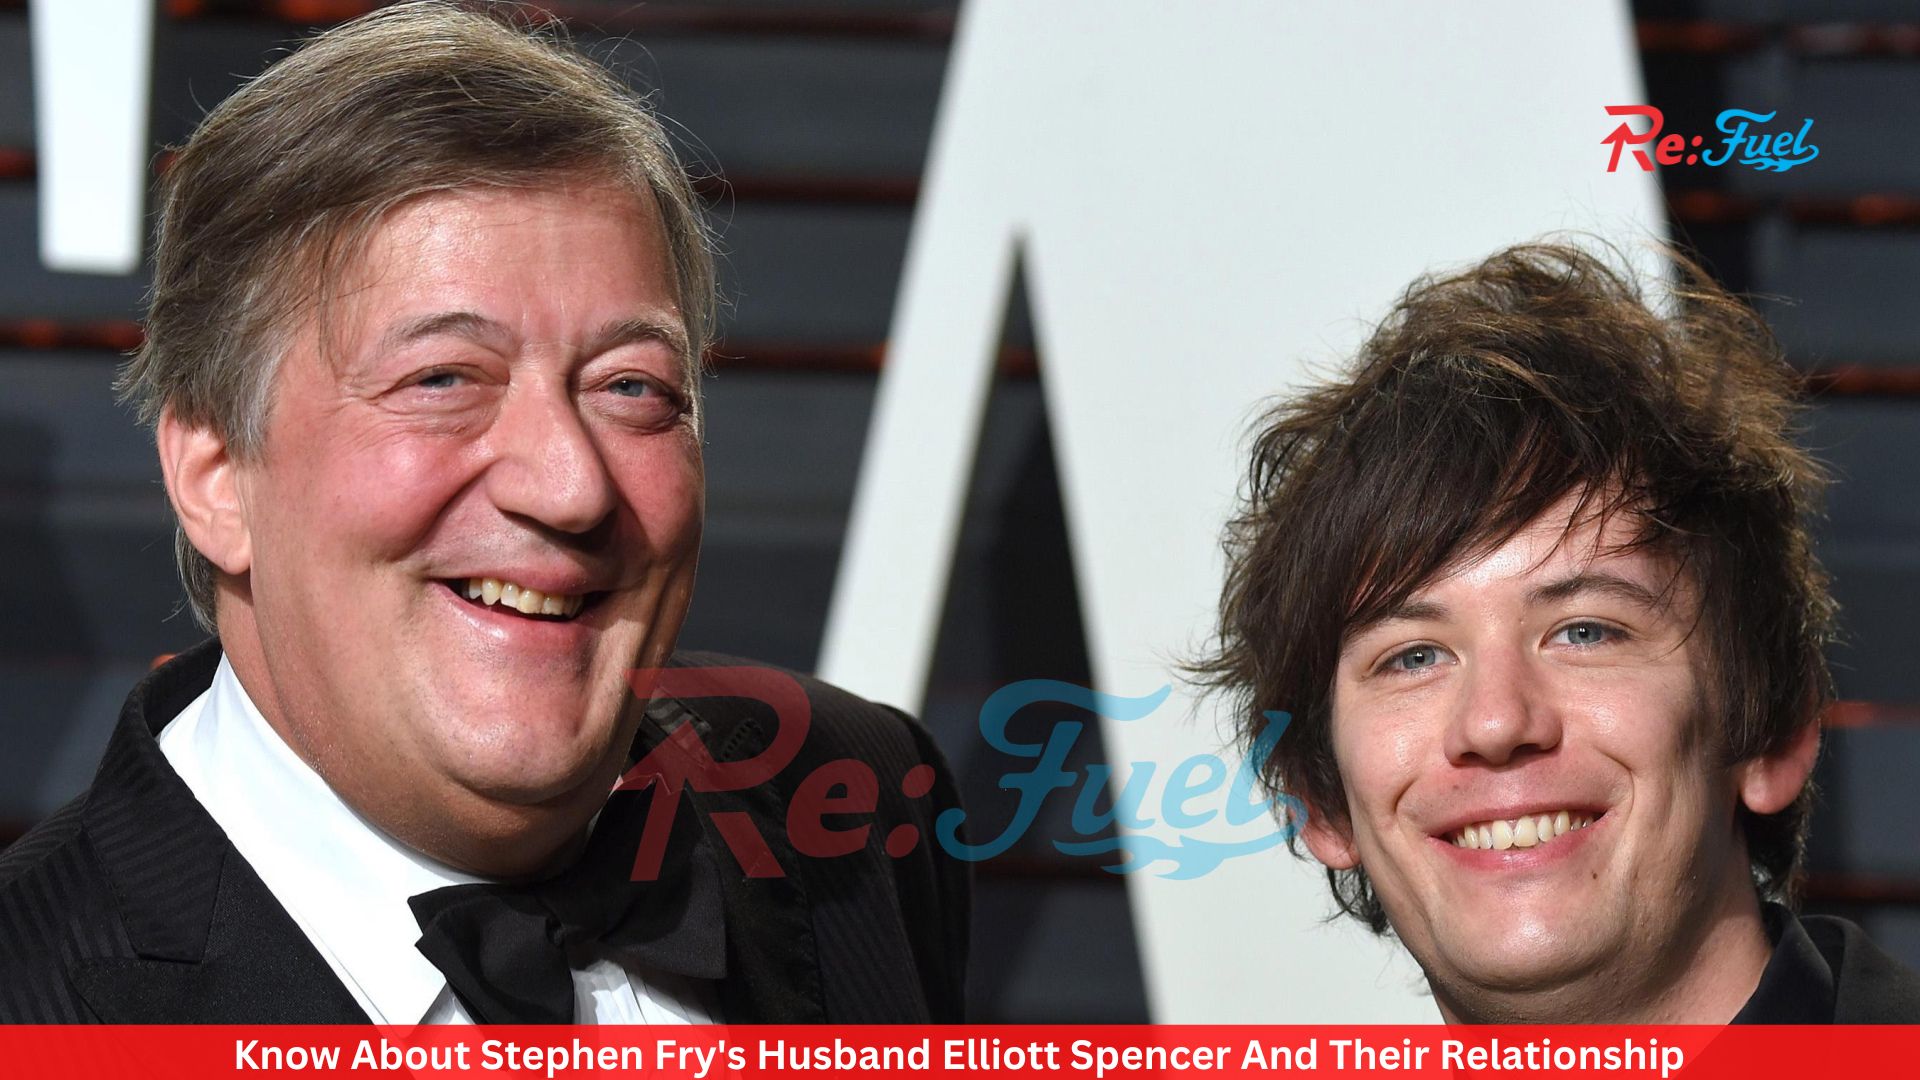 Know About Stephen Fry's Husband Elliott Spencer And Their Relationship